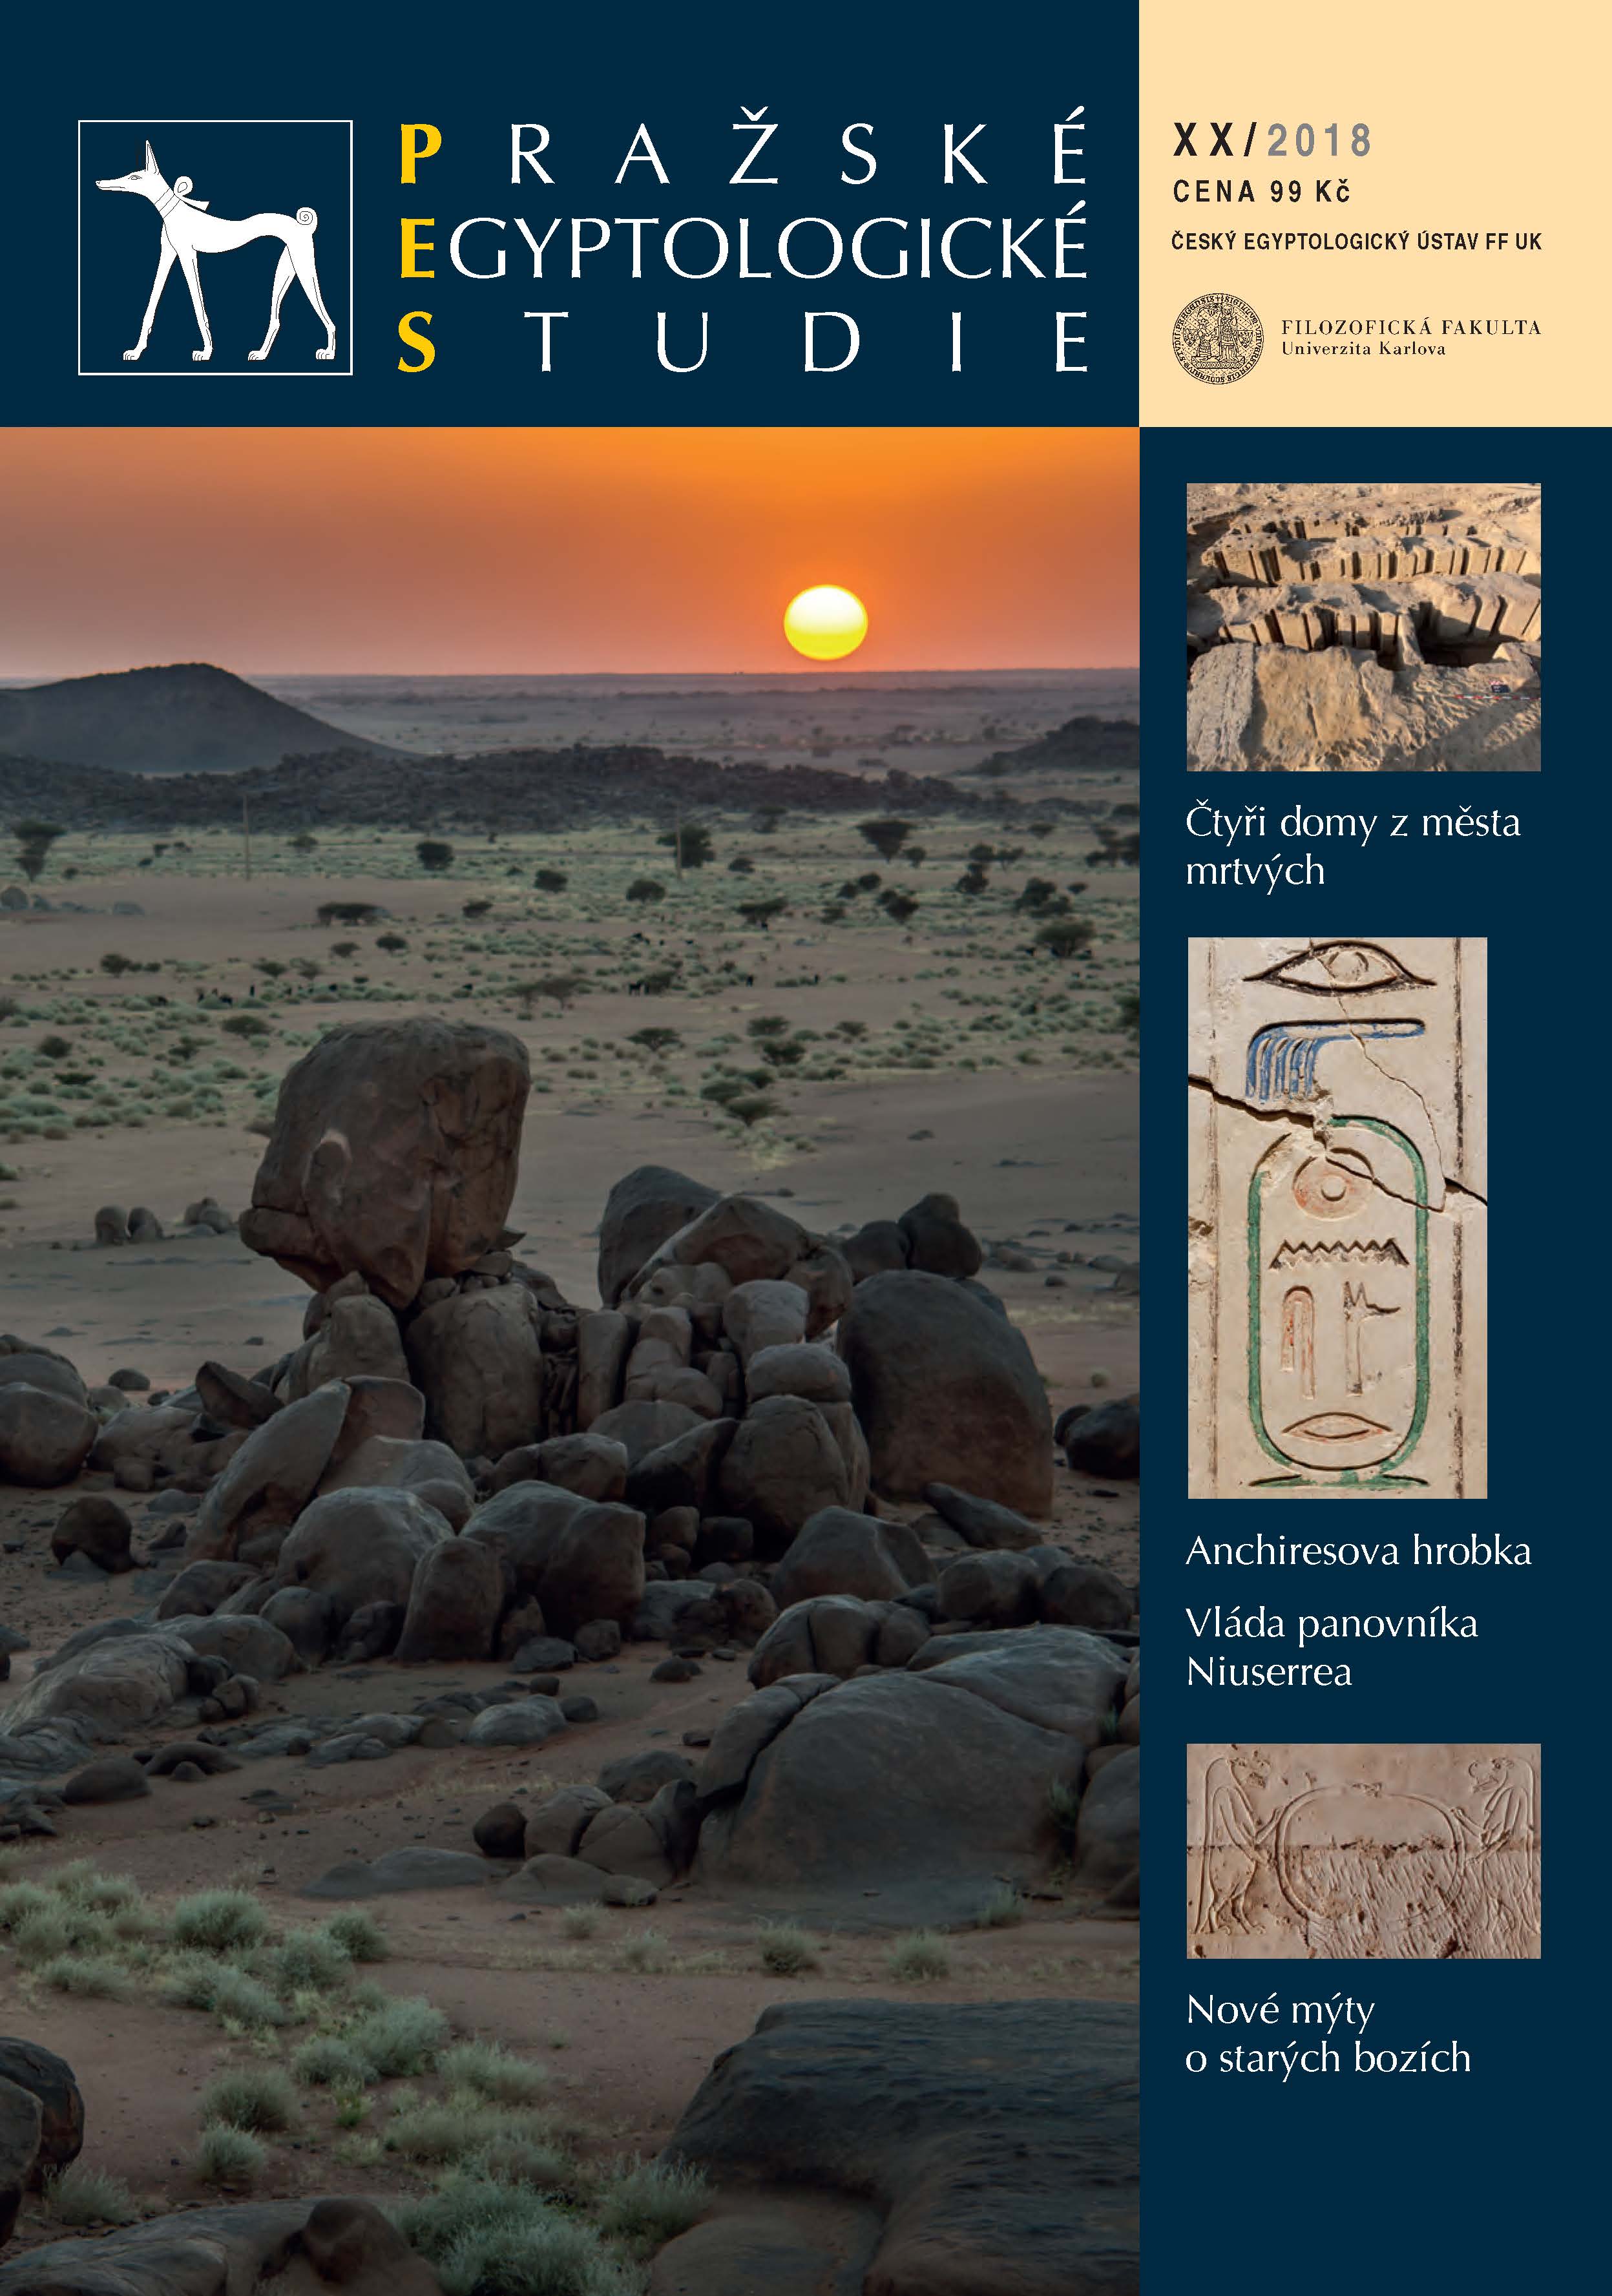 Four houses from the city of the dead. Preliminary report on excavations of a complex of tombs, AS 103, under the New Kingdom temple at Abusir South Cover Image